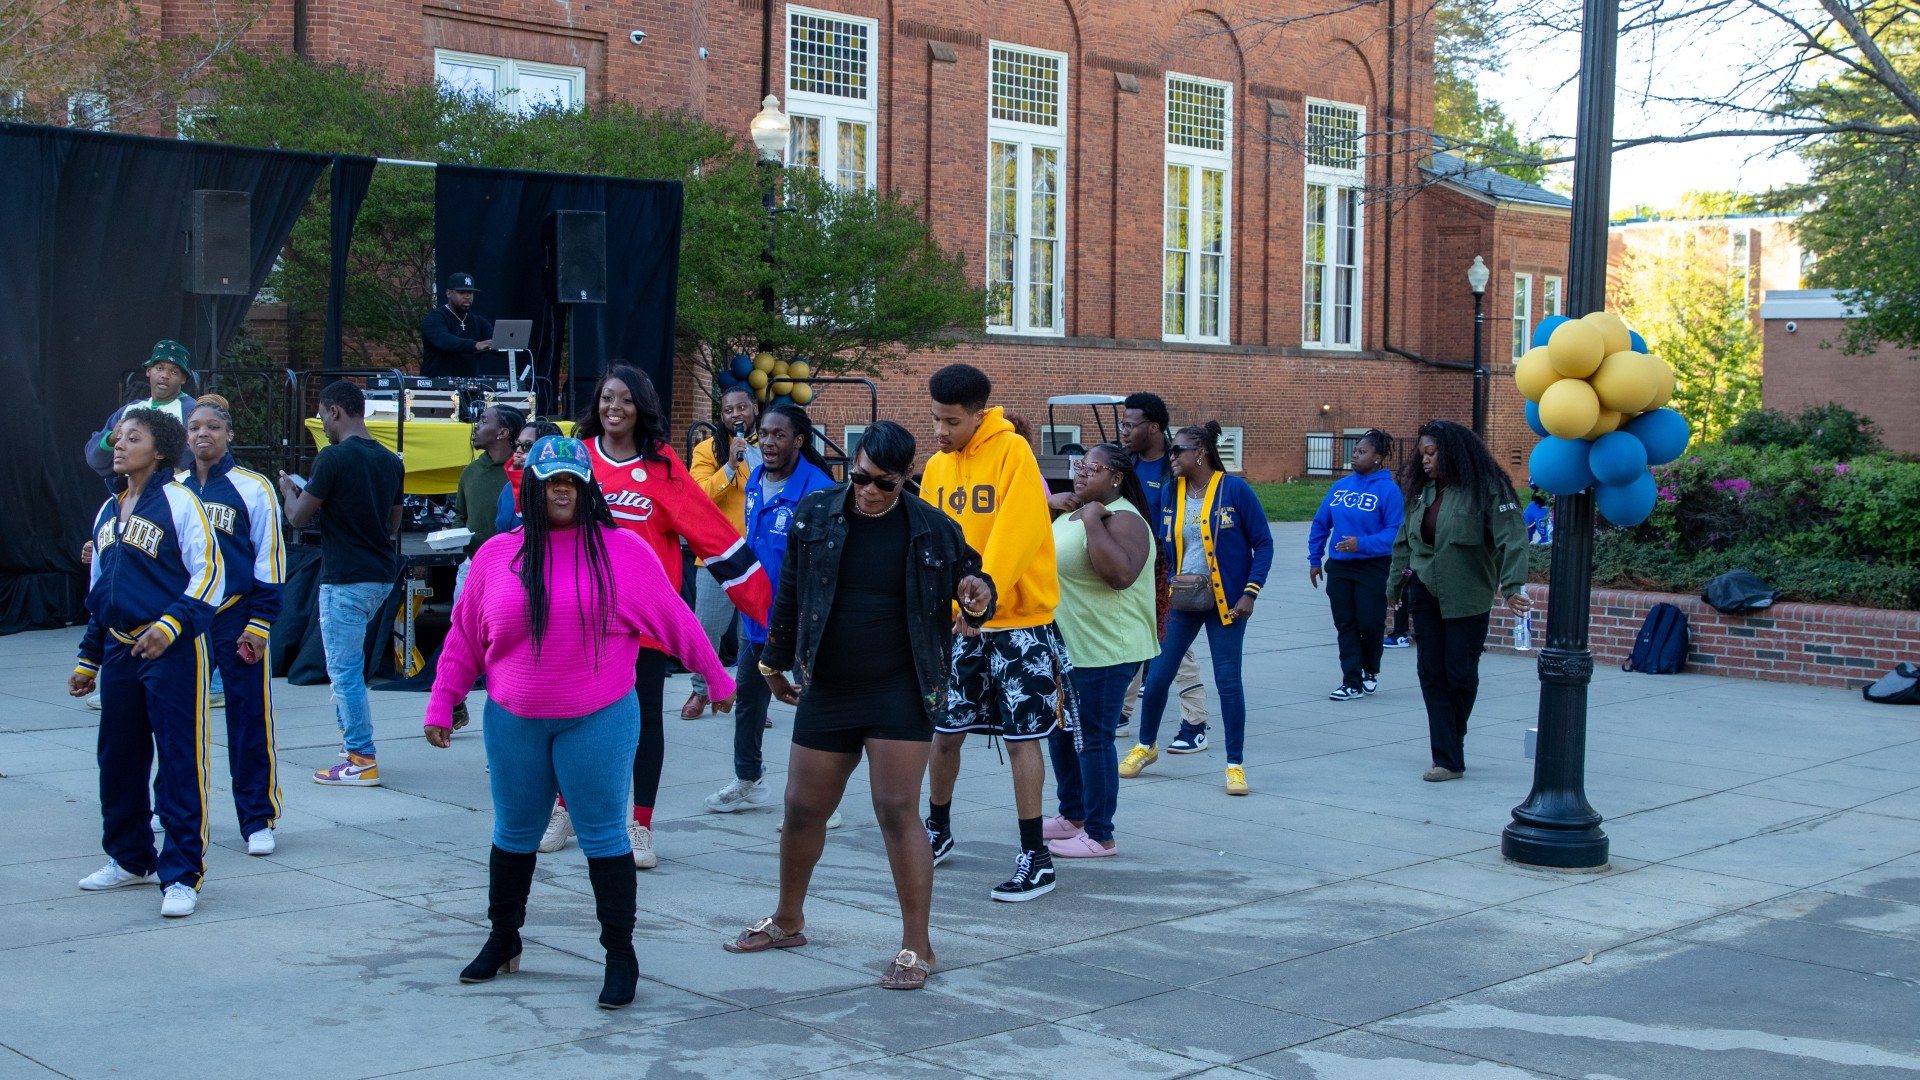 Students dancing during the post-Inauguration party on the block